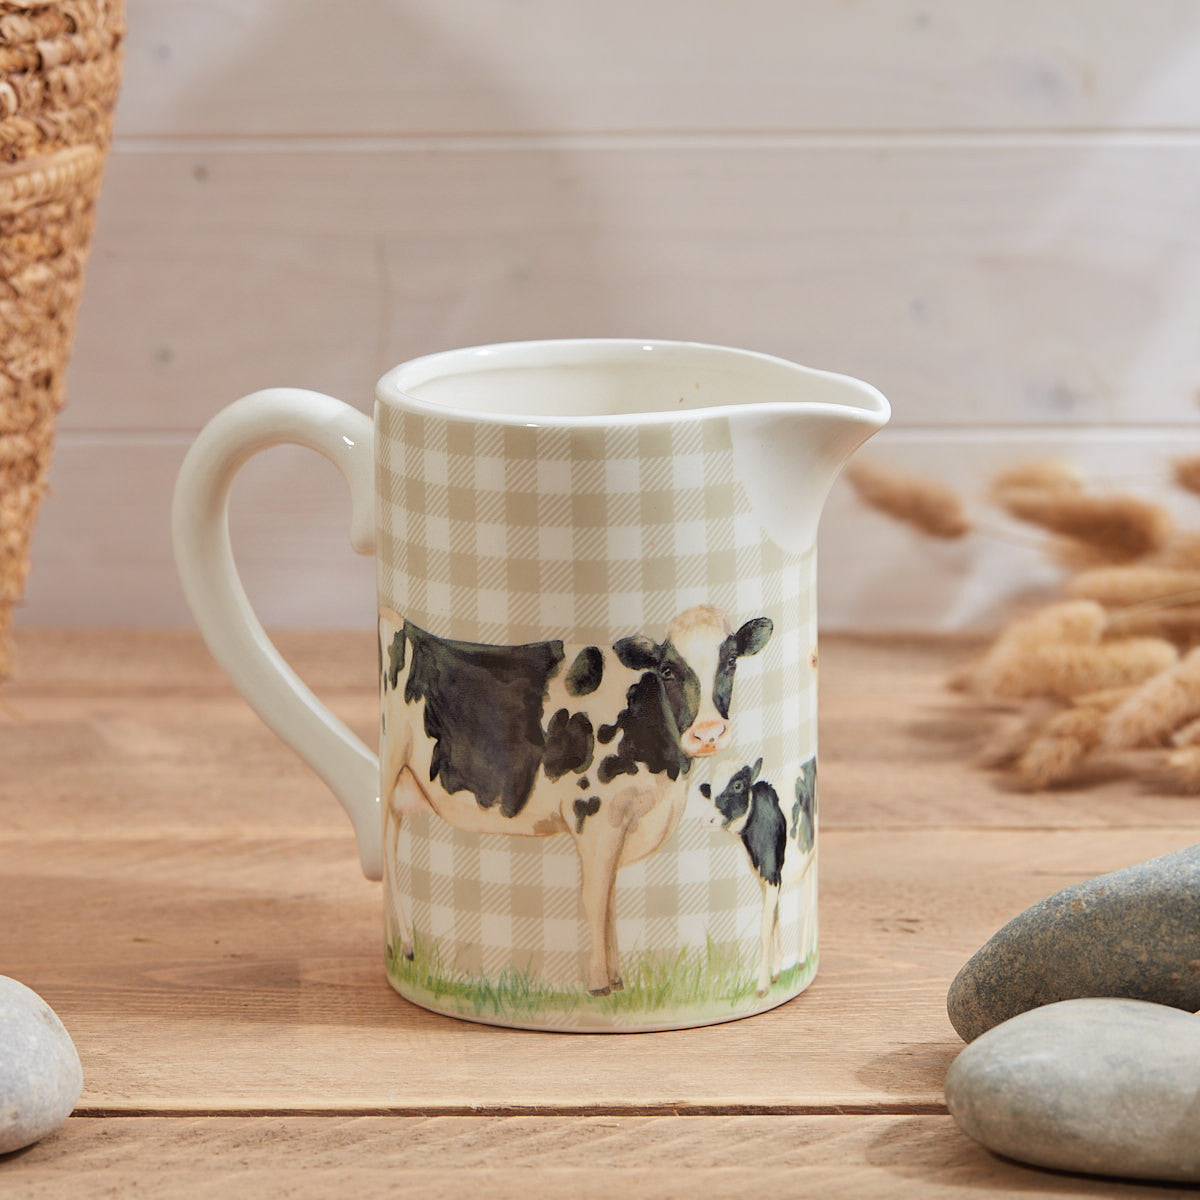 Farm Animal Jug Taupe Gingham Ceramic with Sheep, Pig and Cow